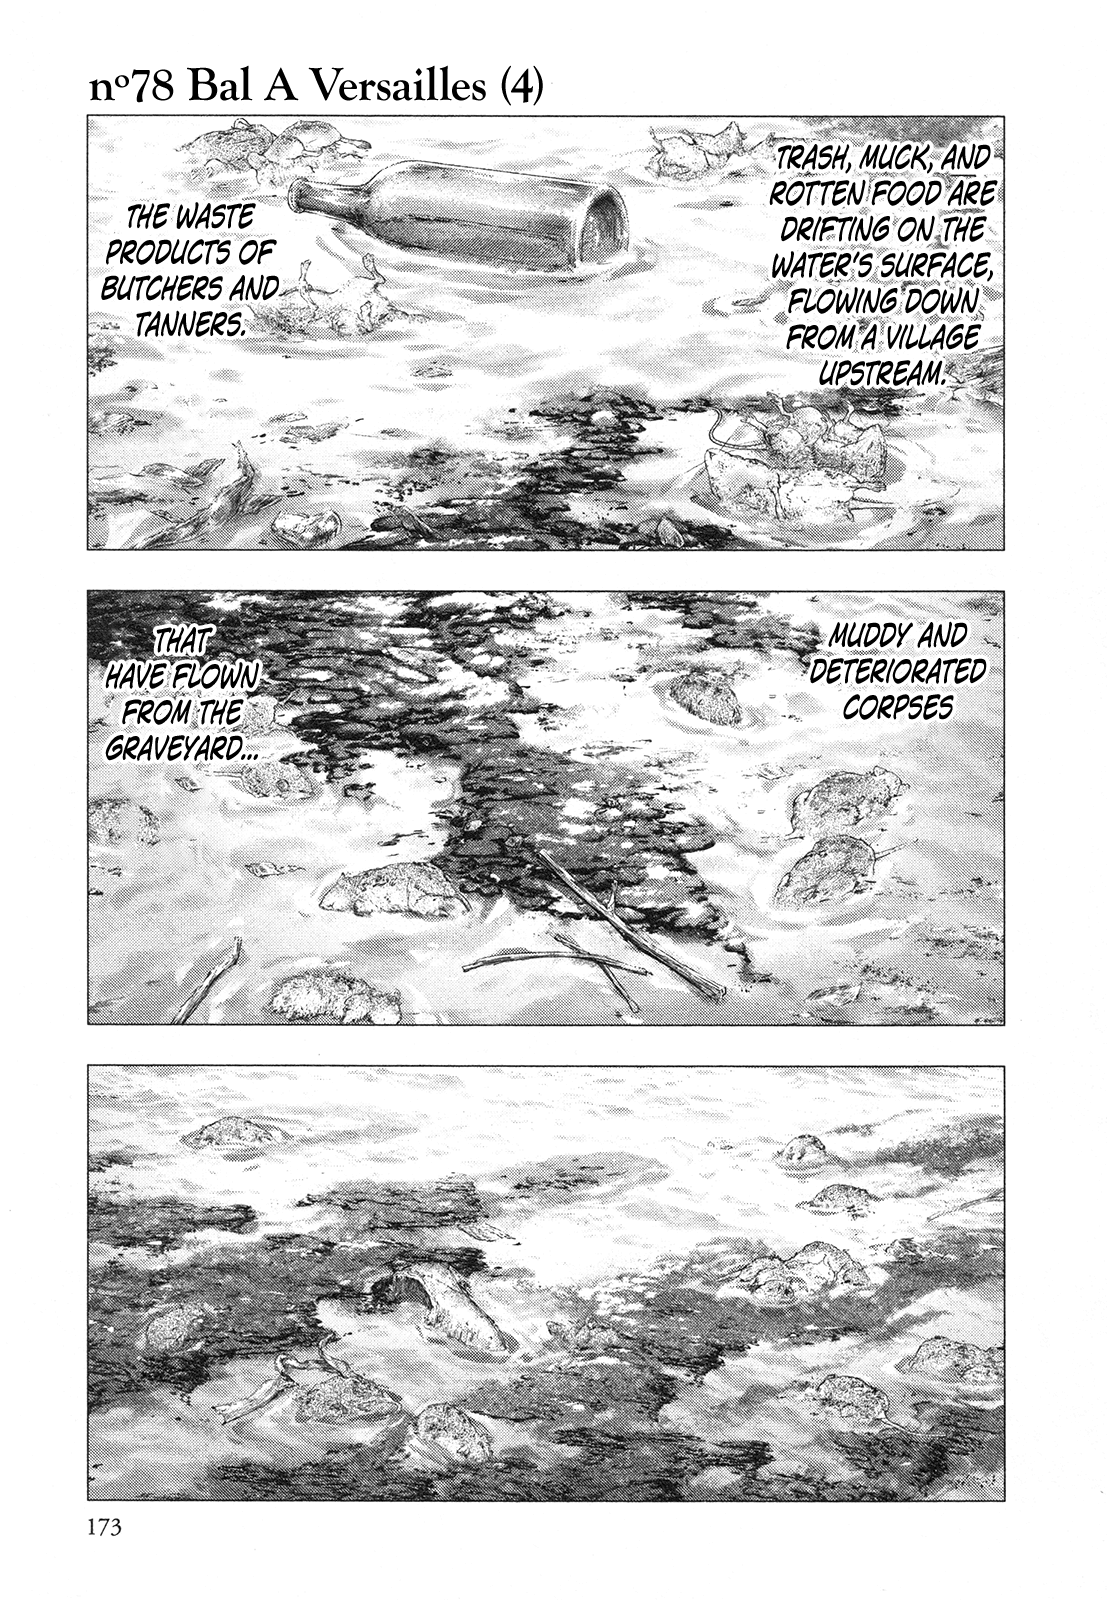 Innocent Rouge Vol.11-Chapter.78-Bal-A-Versailles-(4) Image